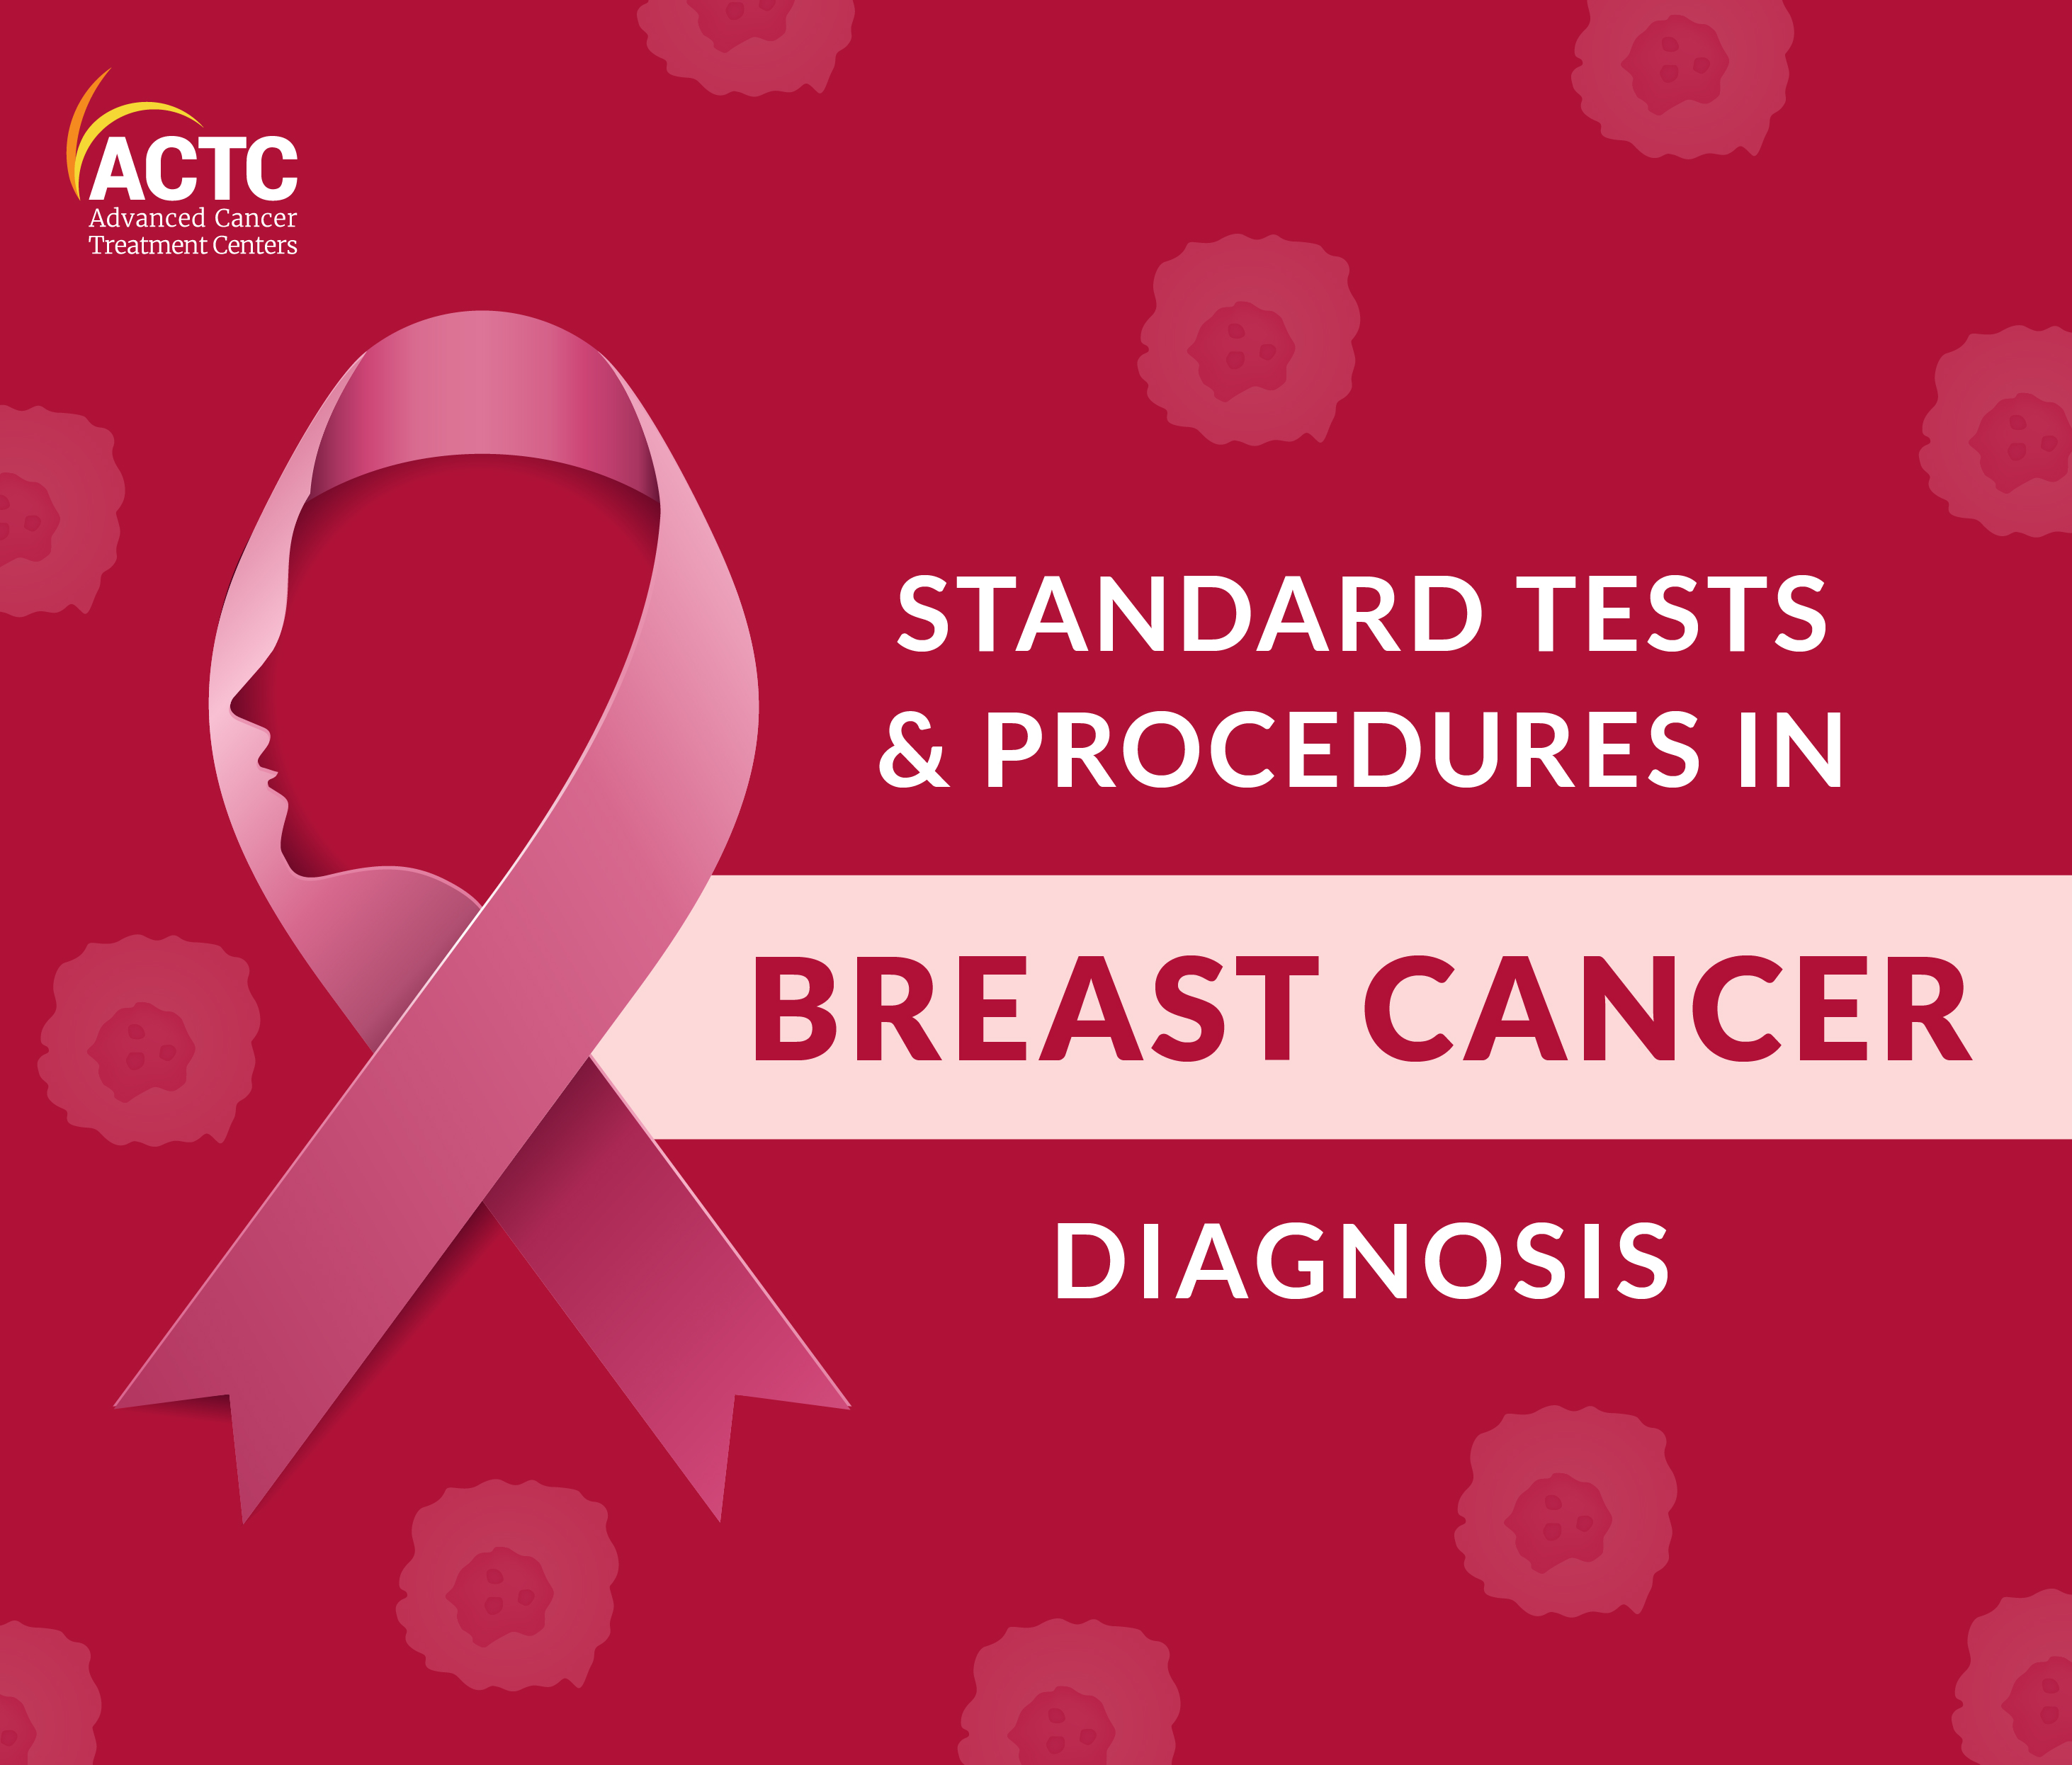 8 Standard Tests And Procedures In Breast Cancer Diagnosis